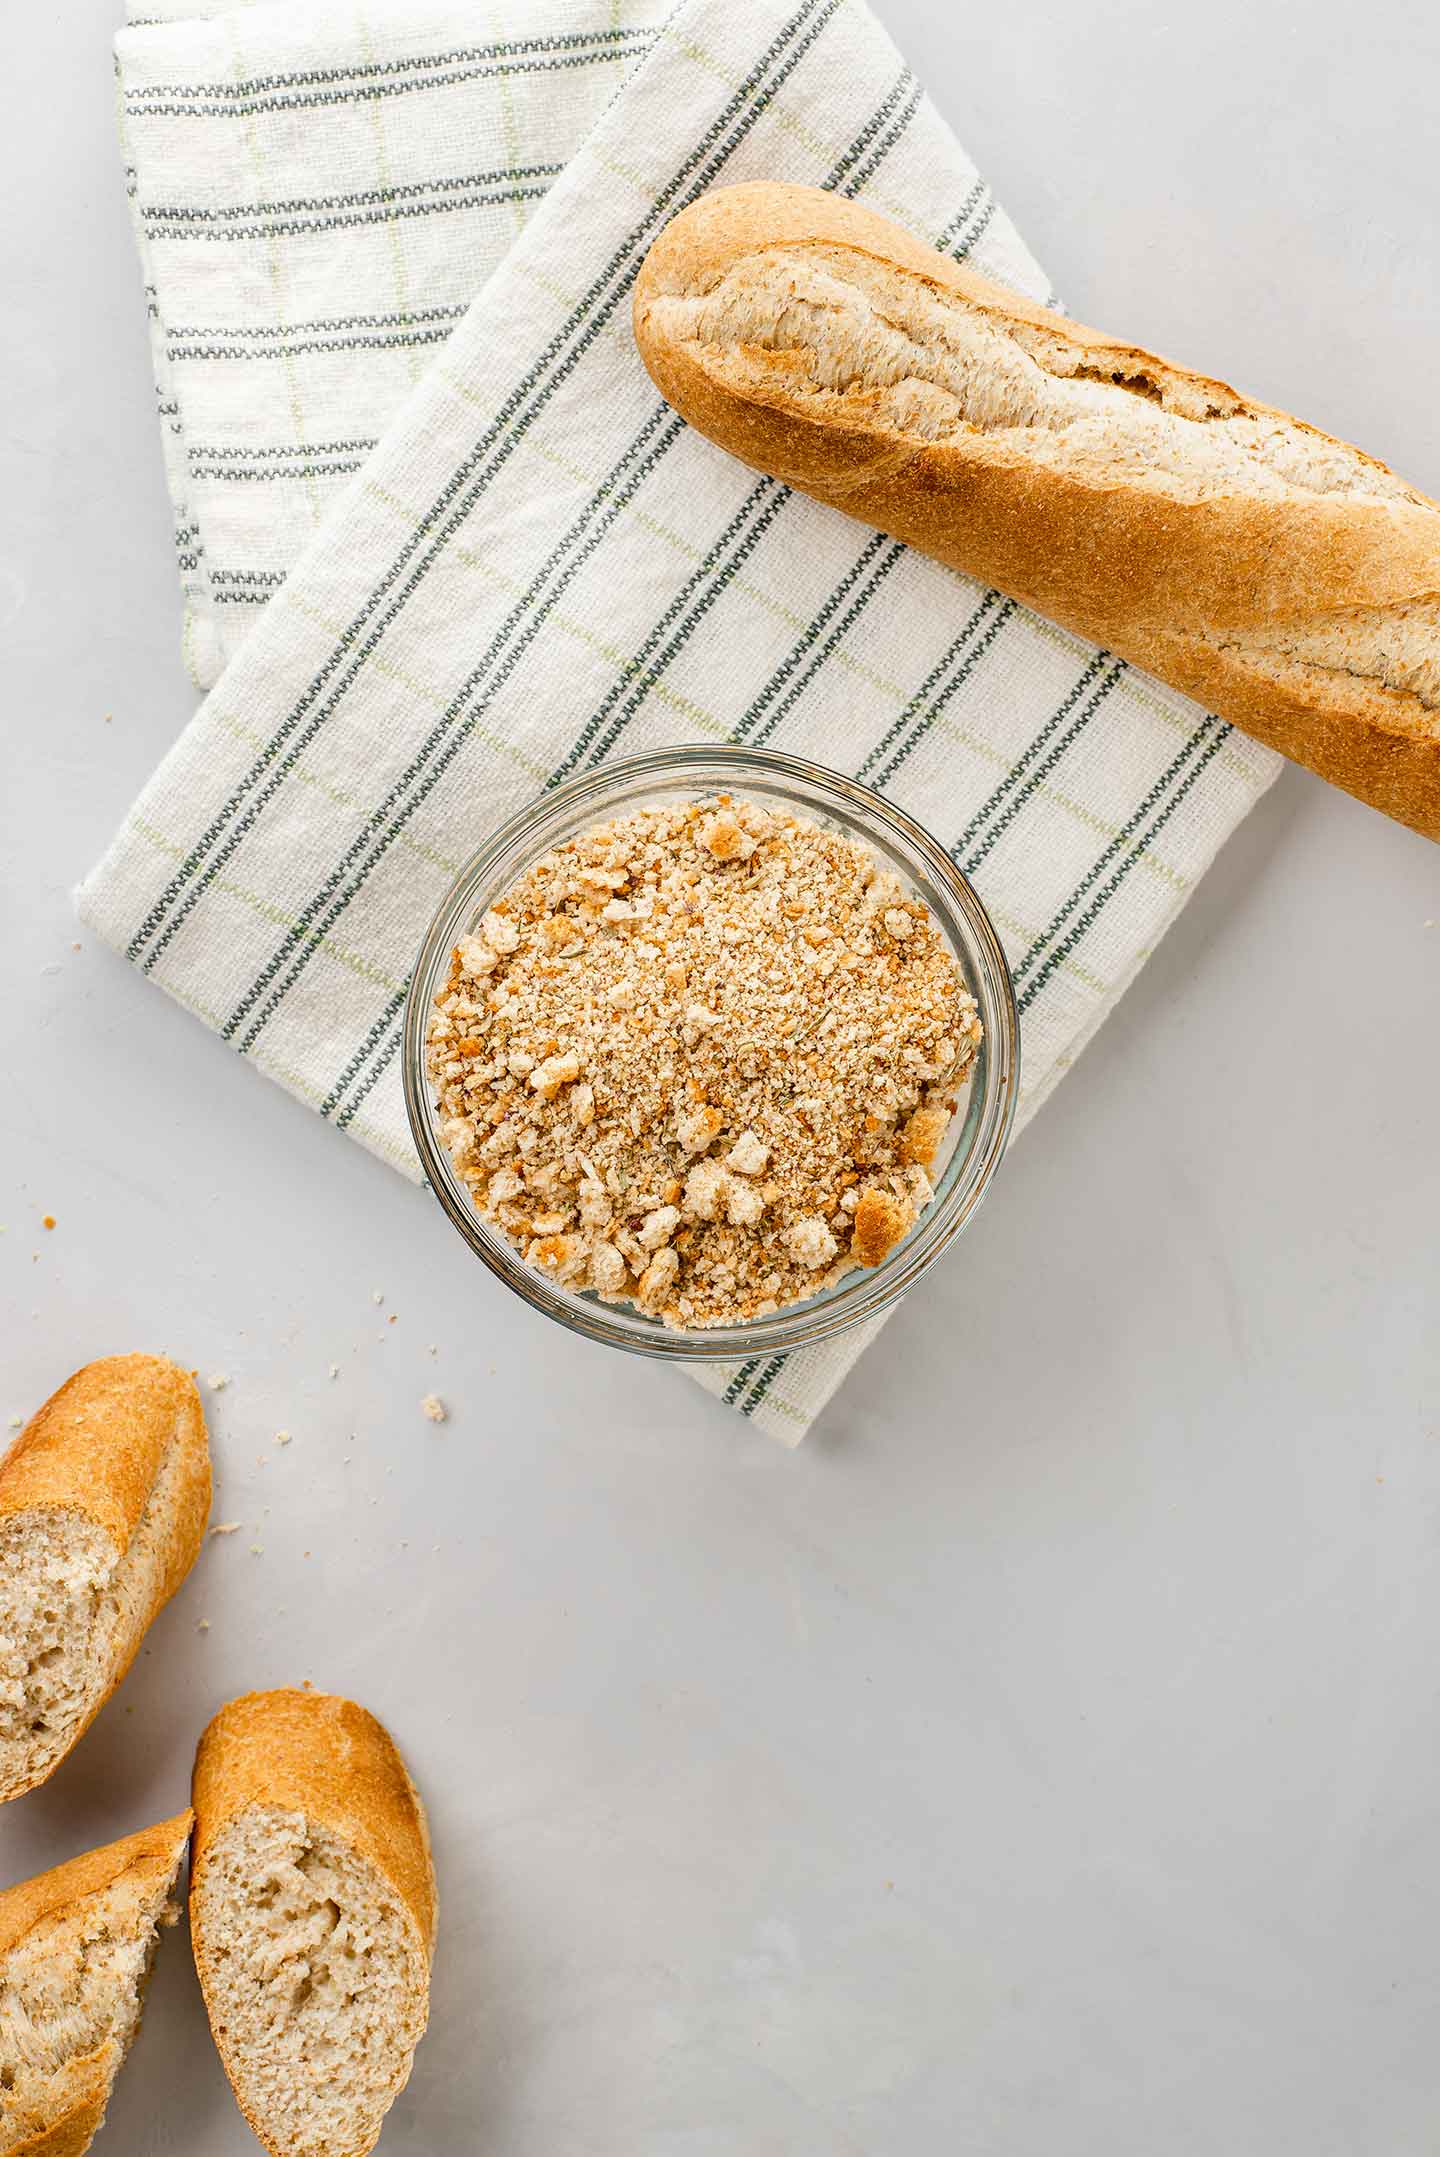 Top down view of quick and easy homemade breadcrumbs in a small glass bowl sitting on a dish towel with a baguette and slices of bread to the side